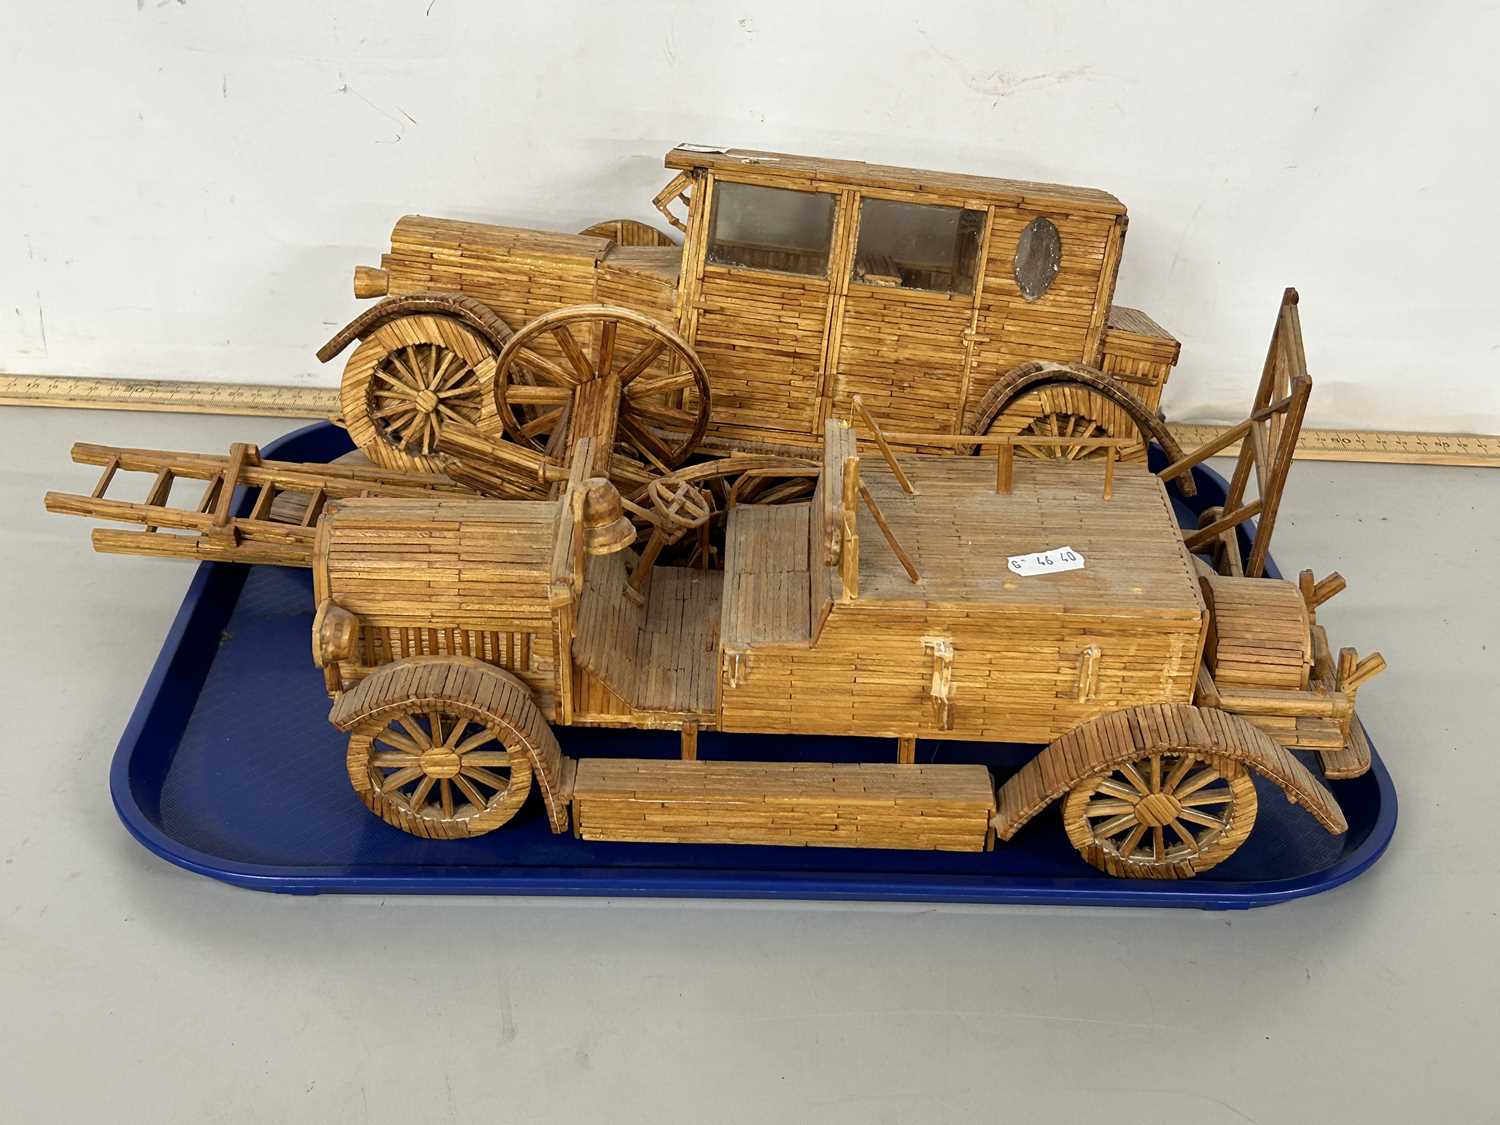 Two matchstick models of vintage cars and other related items